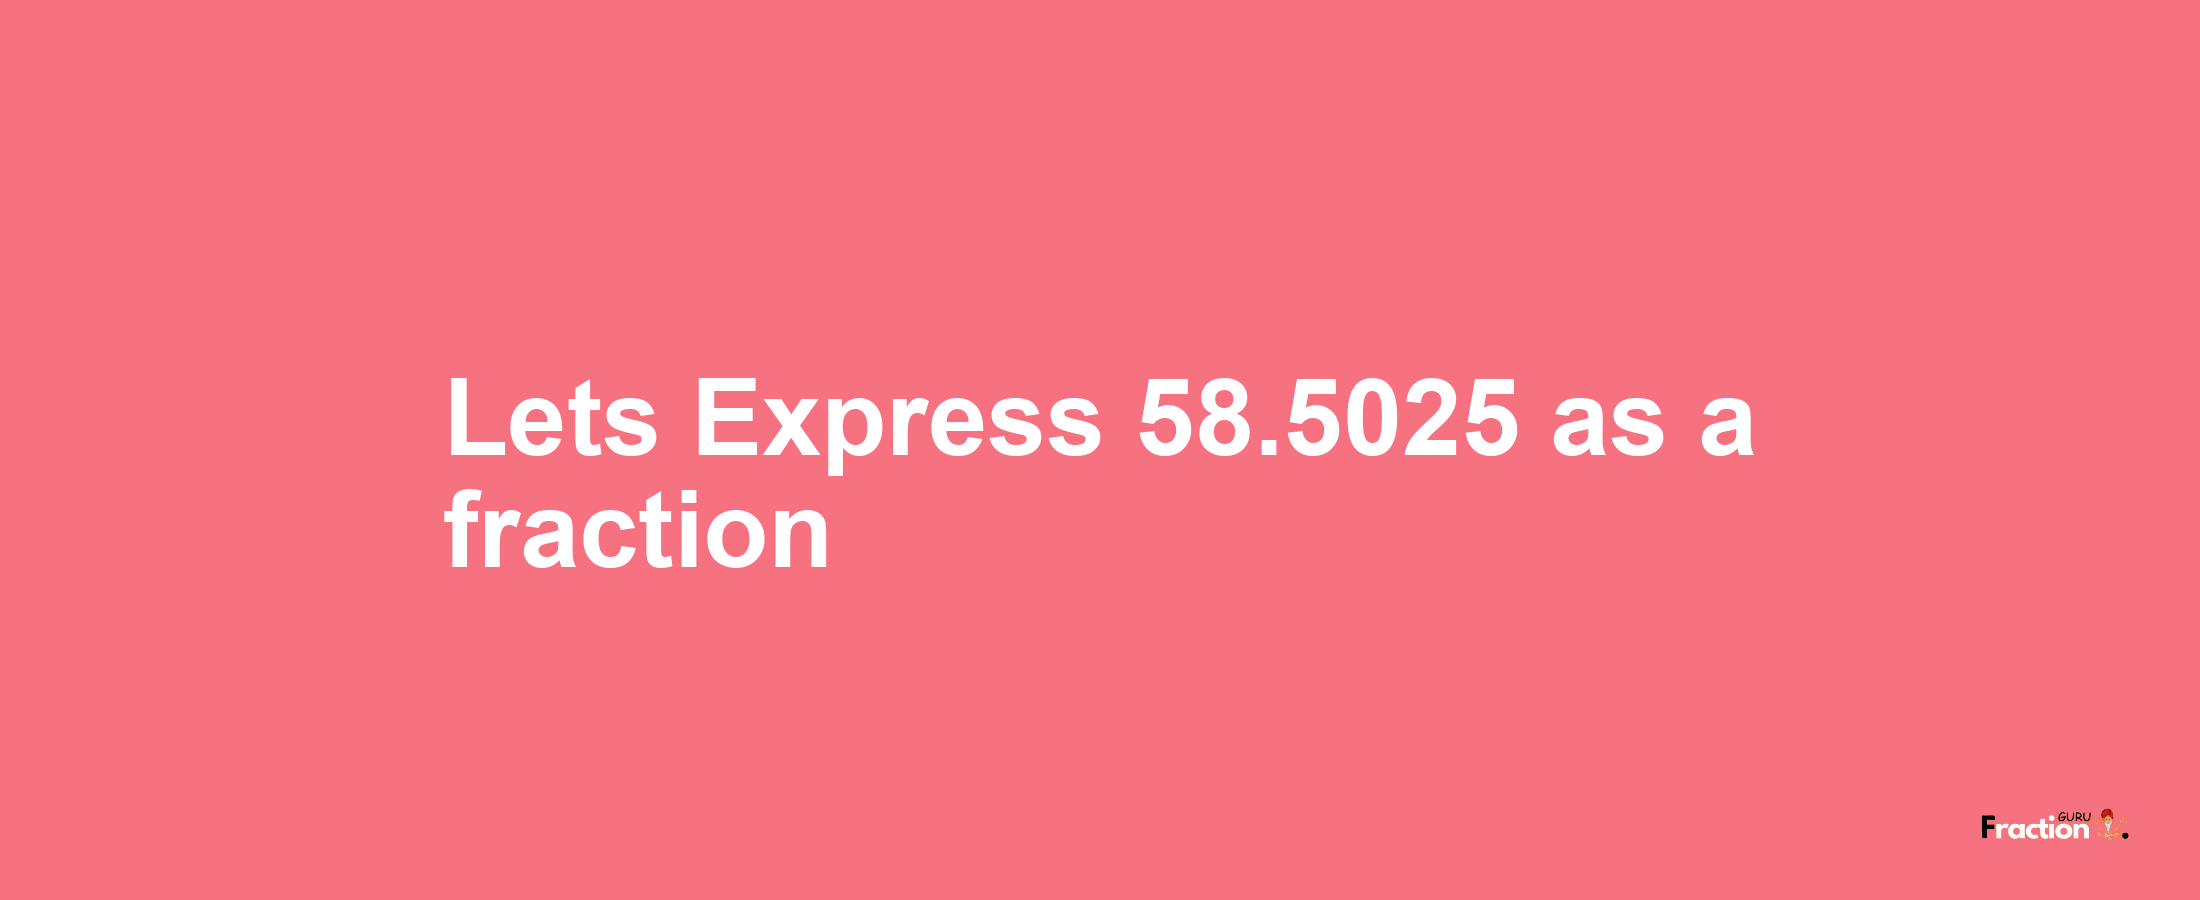 Lets Express 58.5025 as afraction